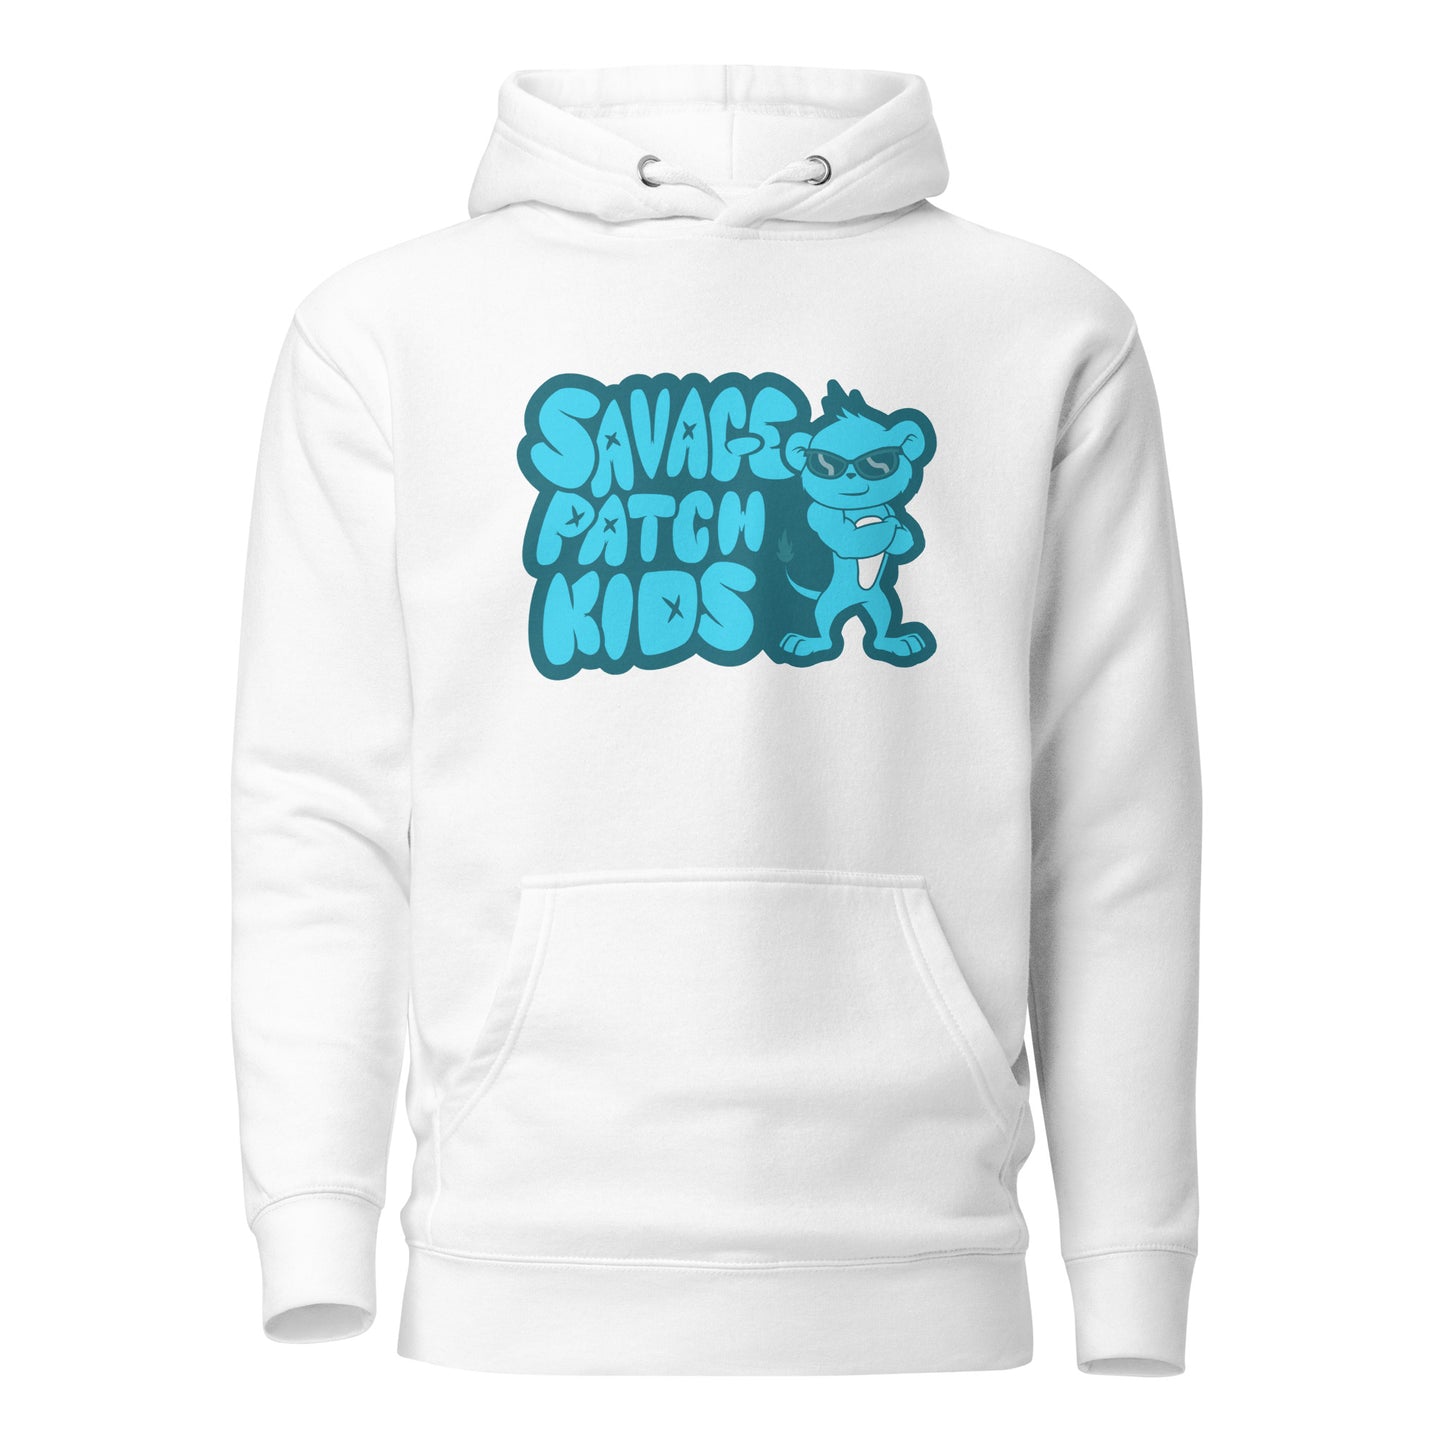 Adult "Patch in Blue" Hoodie